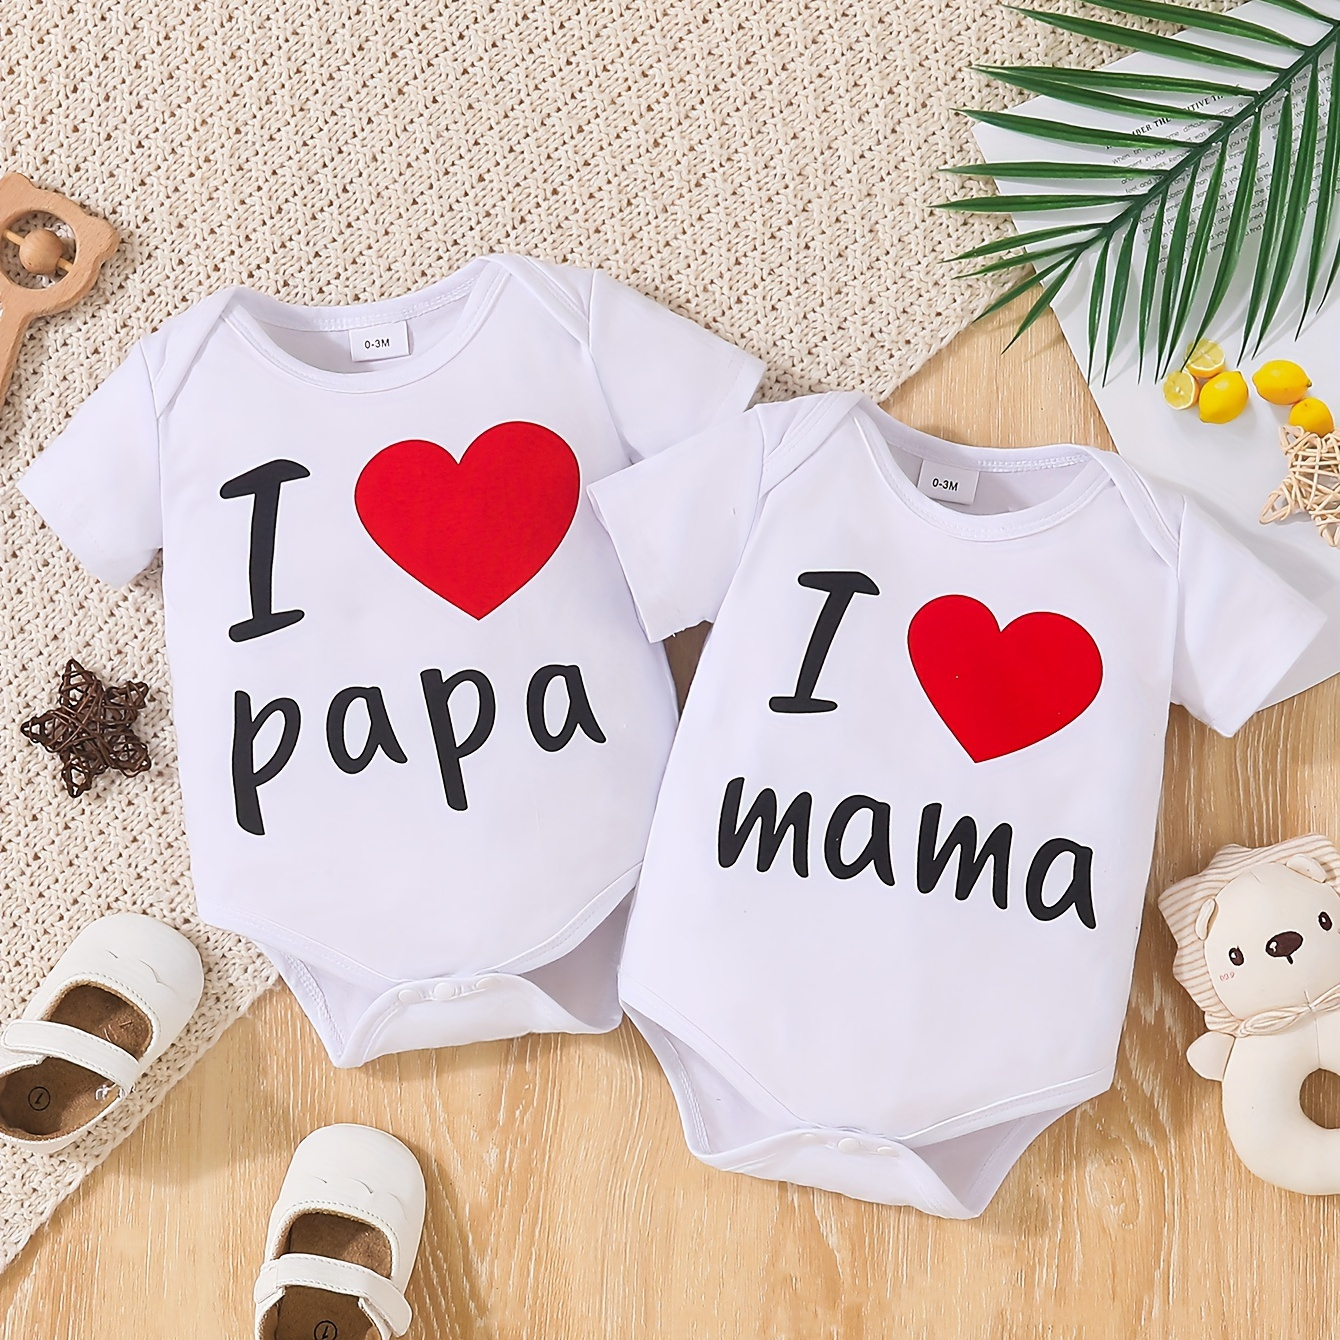 

2pcs Baby's Triangle Cotton Bodysuit, "i Love Papa" & "i Love Mama" Print, Casual Short Sleeve Romper, Toddler & Infant Boy's Clothing